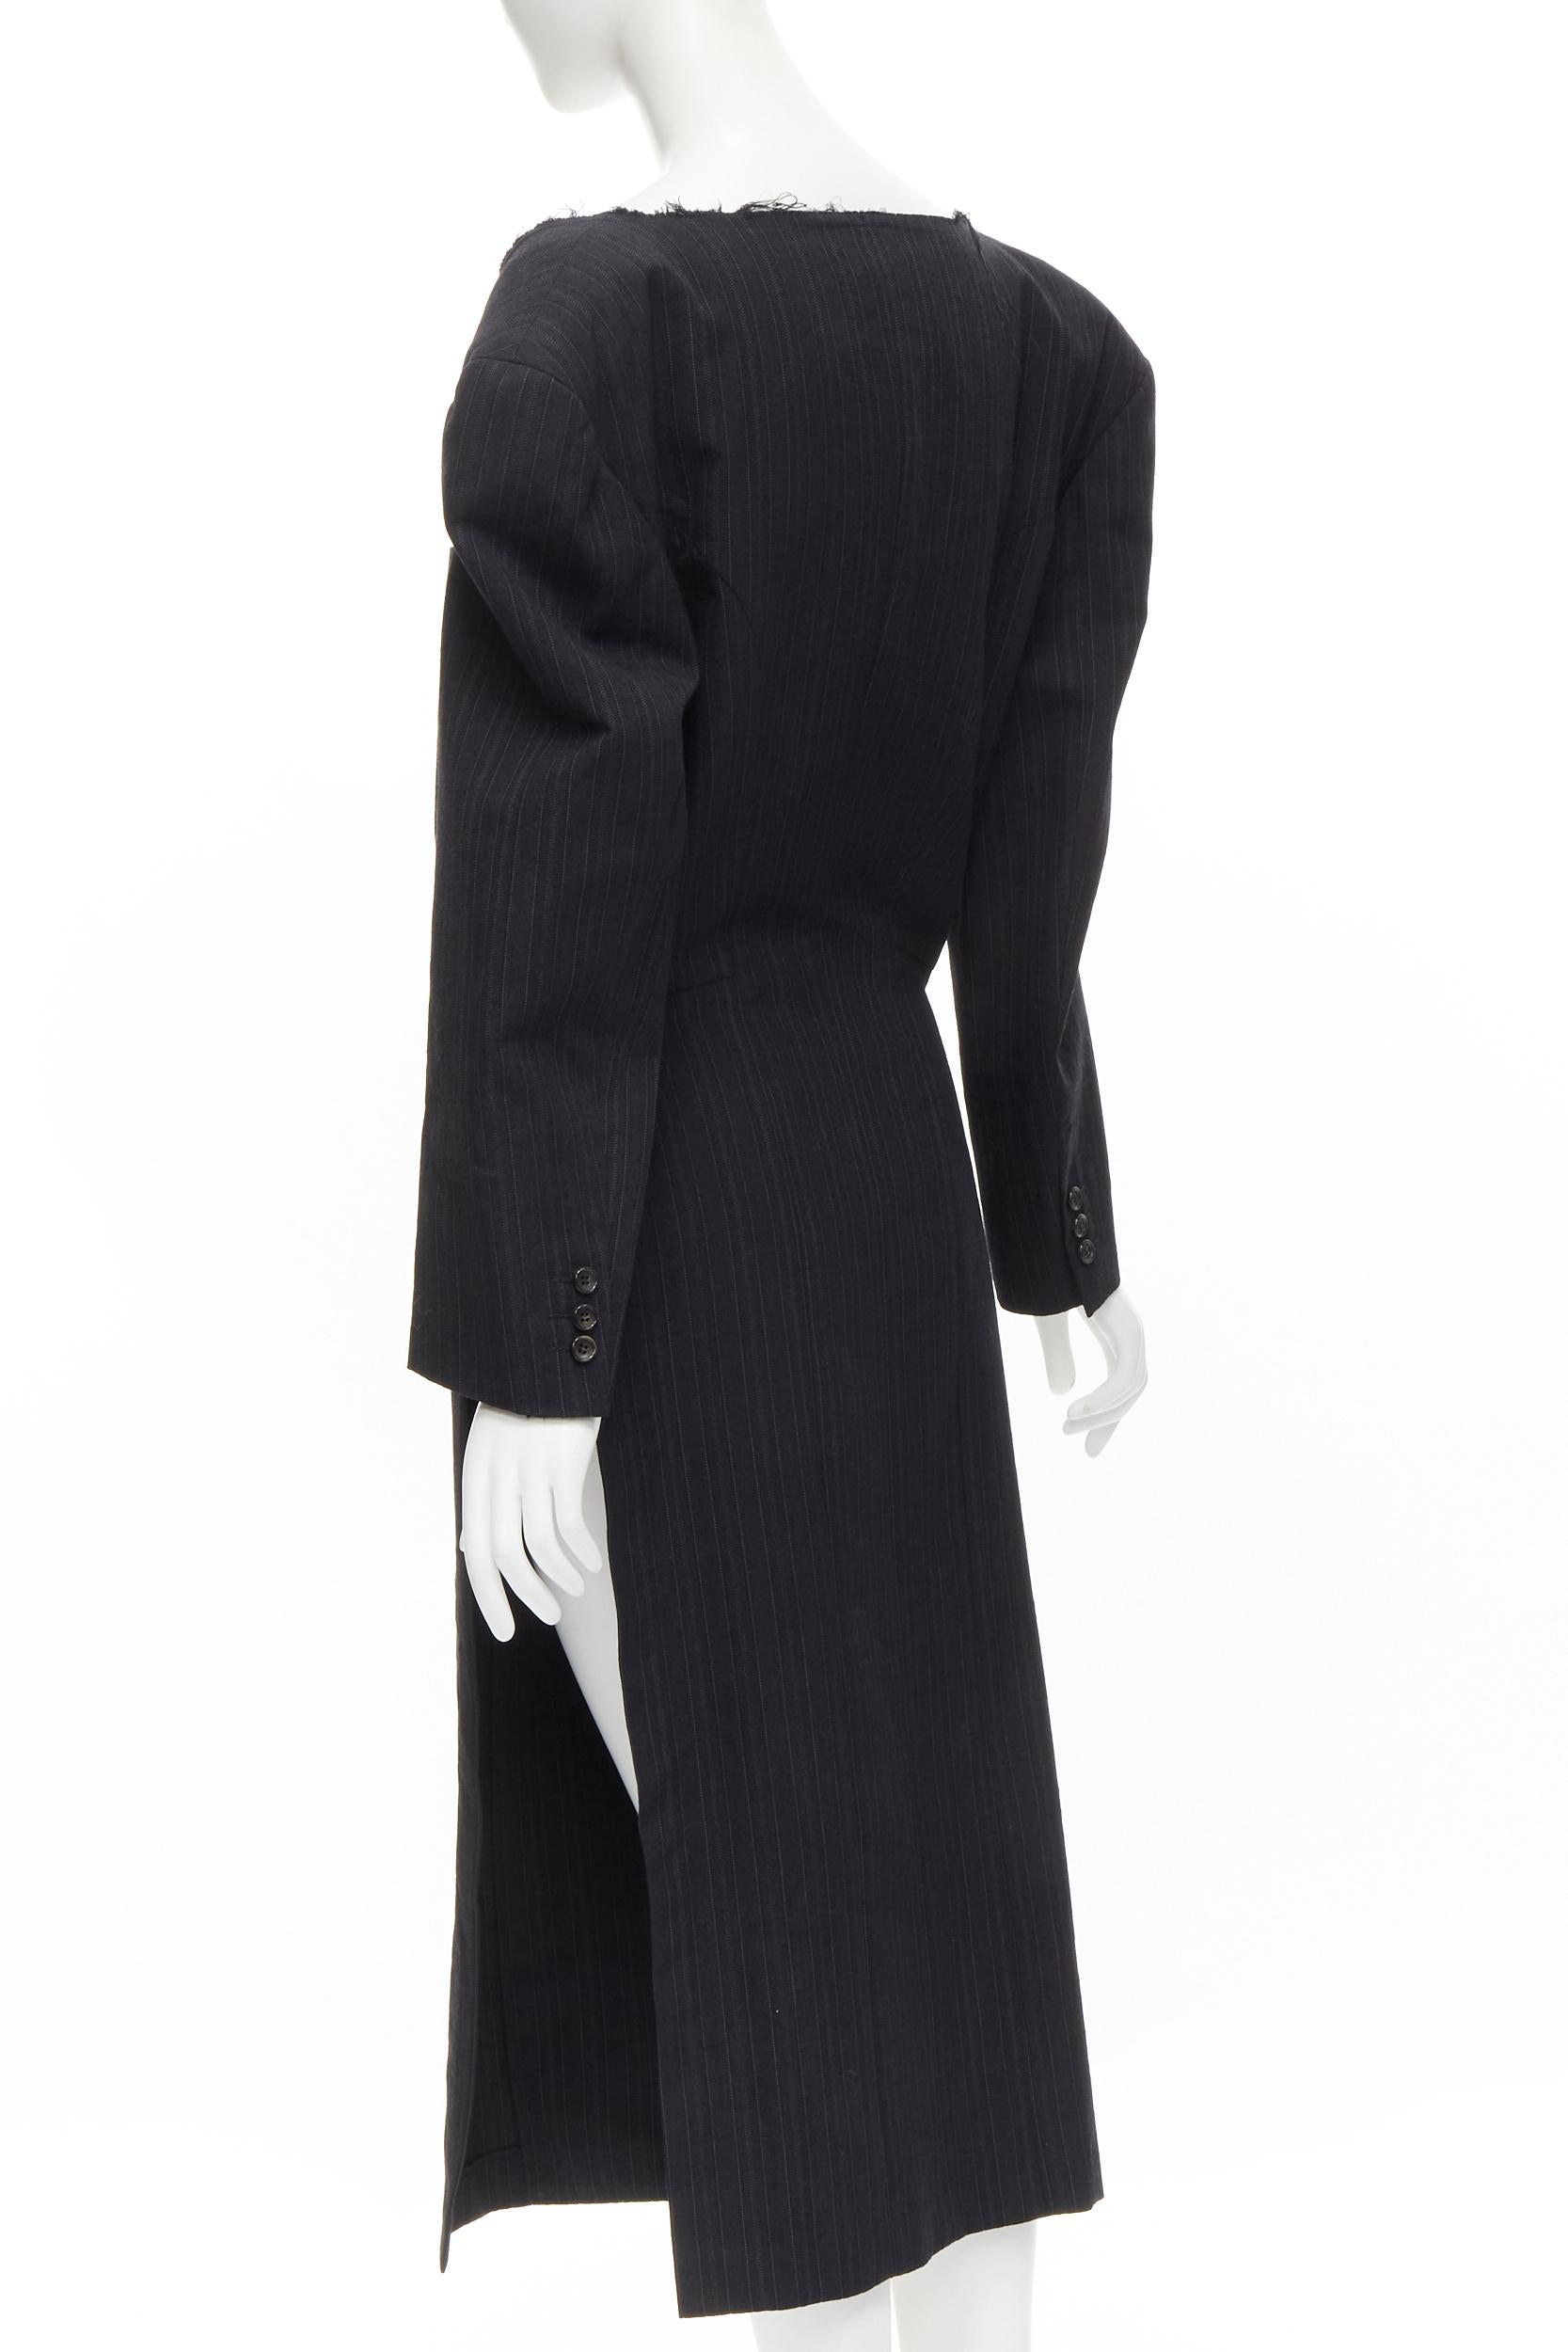 COMME DES GARCONS 1994 dark grey pinstripe frayed cut collar boxy coat M For Sale 1